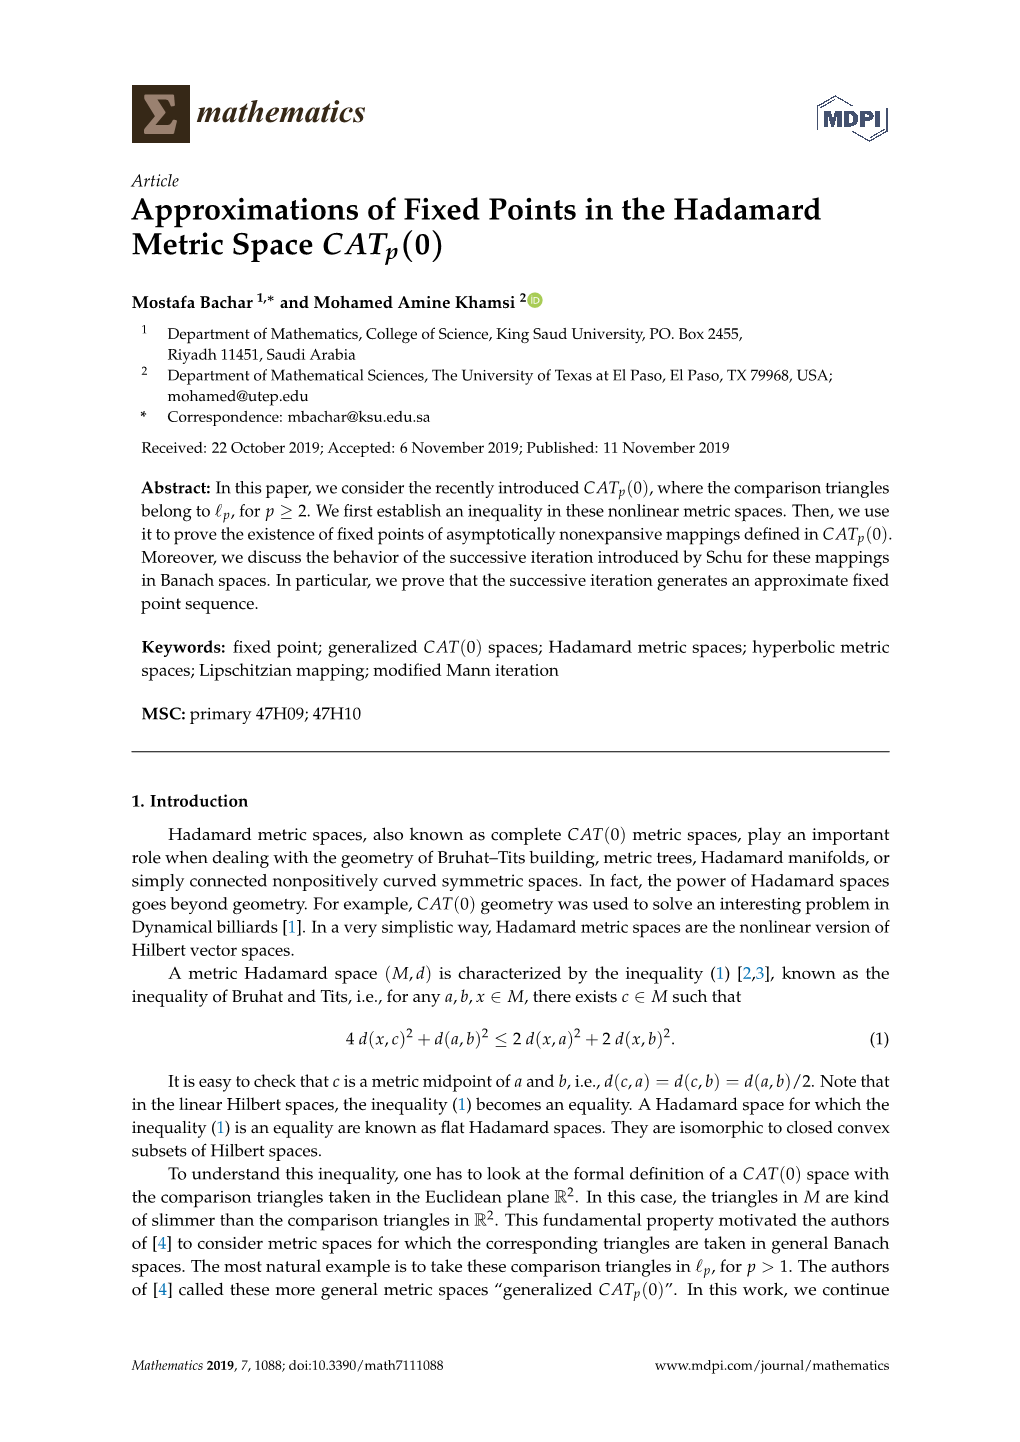 Approximations of Fixed Points in the Hadamard Metric Space Catp(0)